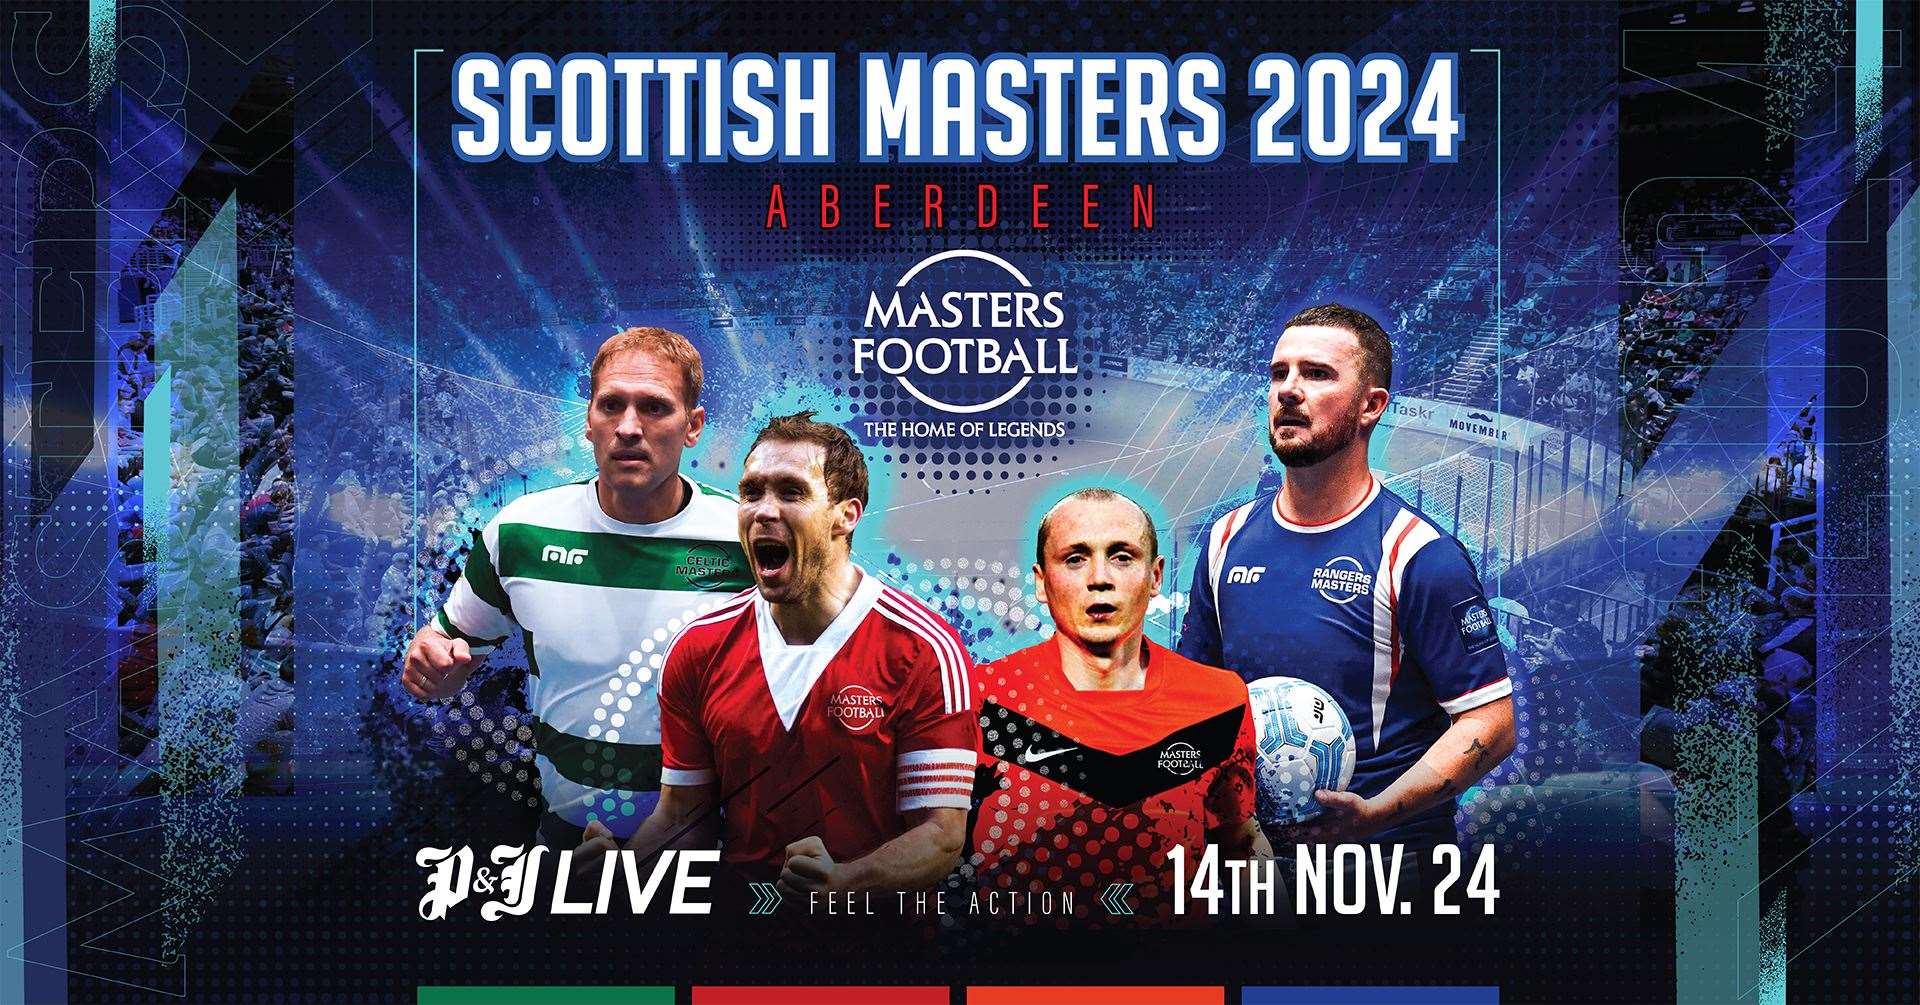 The Scottish Masters football is coming to Aberdeen.